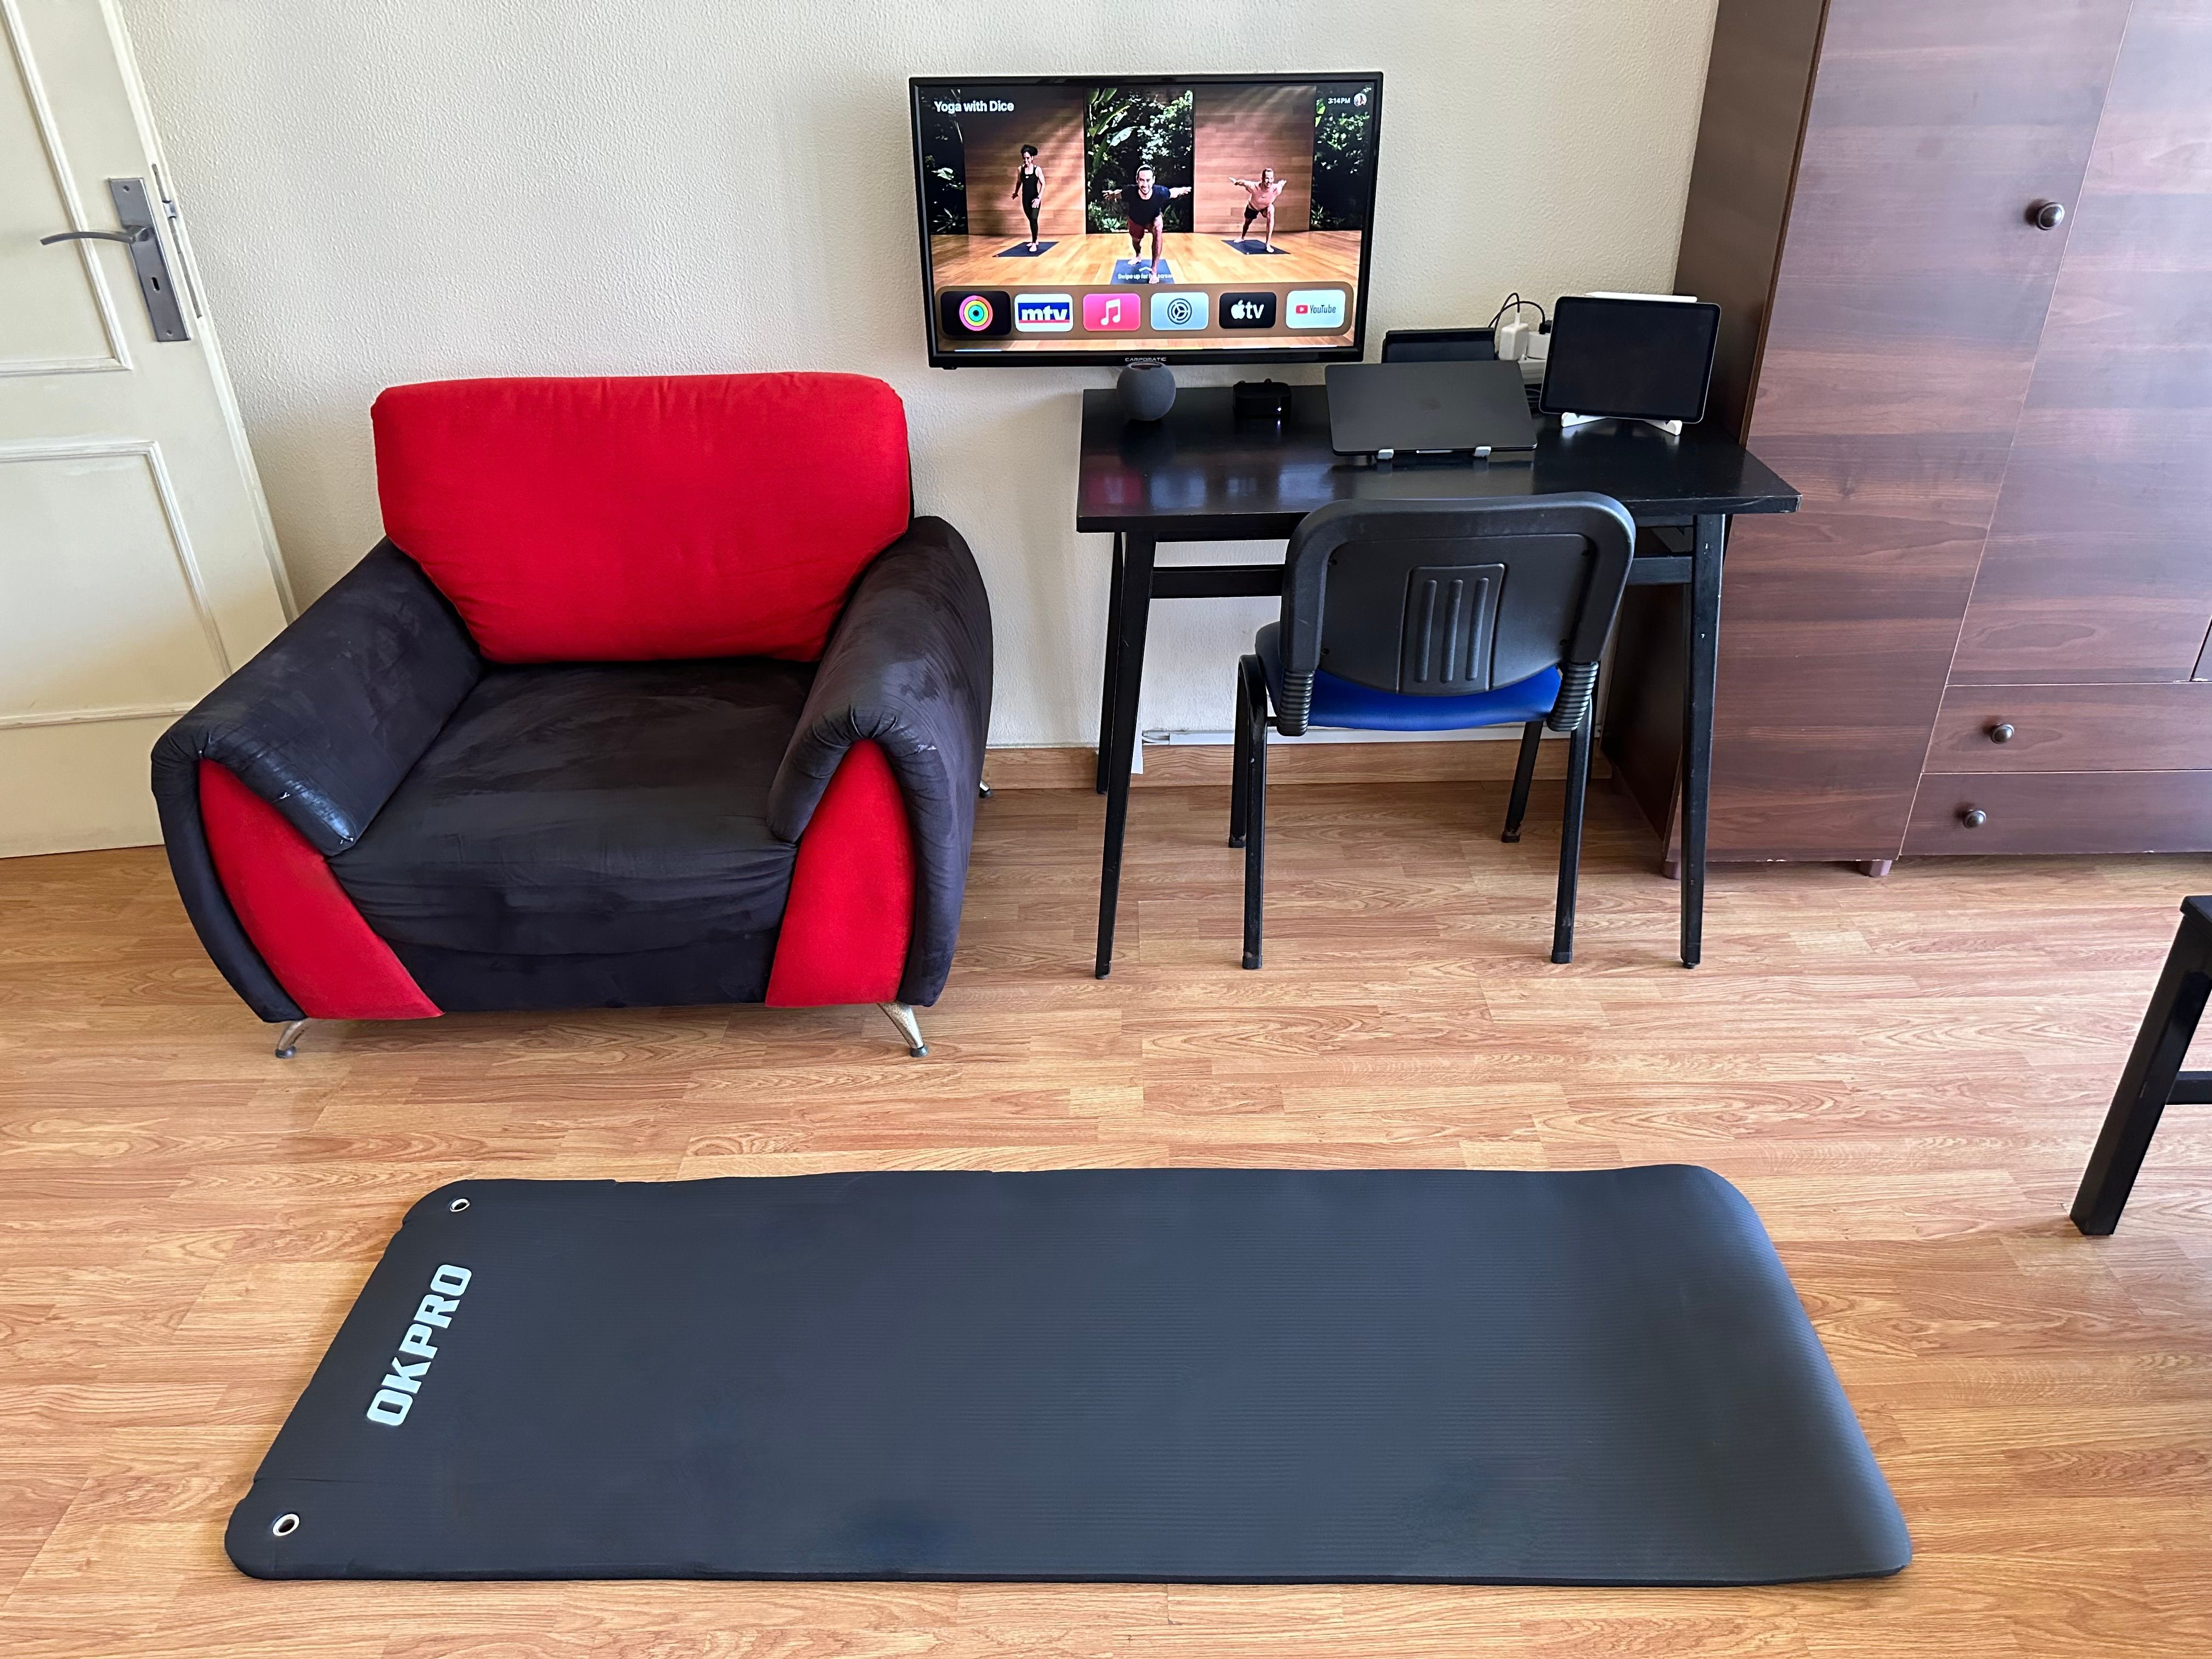 Apple TV 4K 3 showing a preview of Fitness+ workouts with an exercise mat placed on the floor